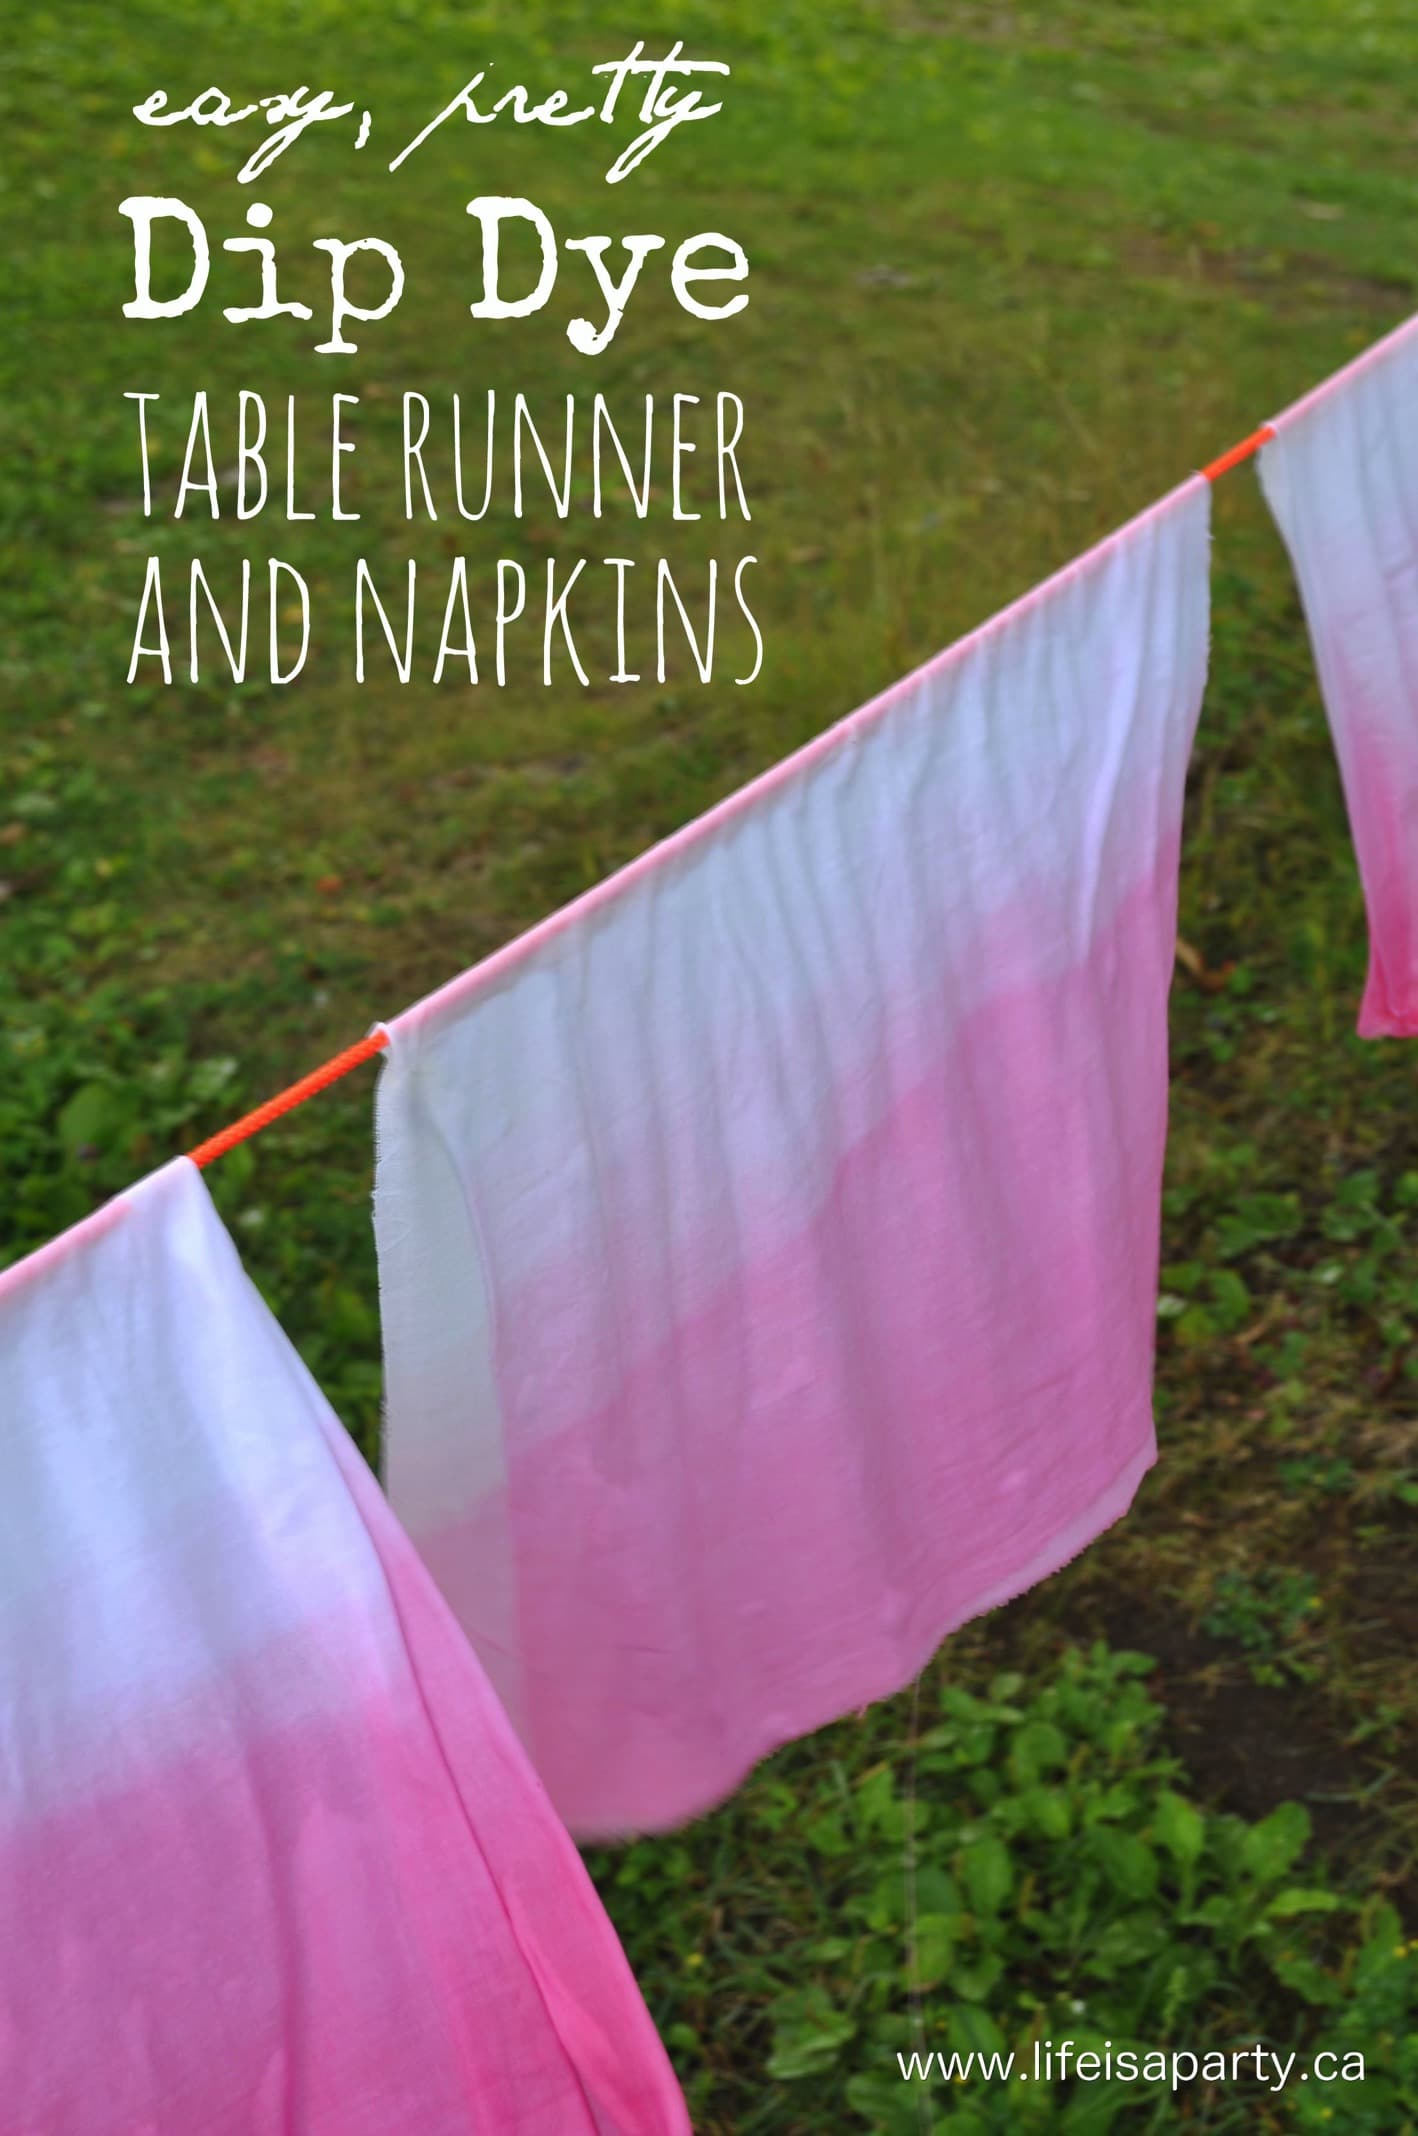 Dip Dyed Table Runner and Napkins: Easy how-to instructions to make your own napkin and table runner with a beautiful dip dyed ombre effect.